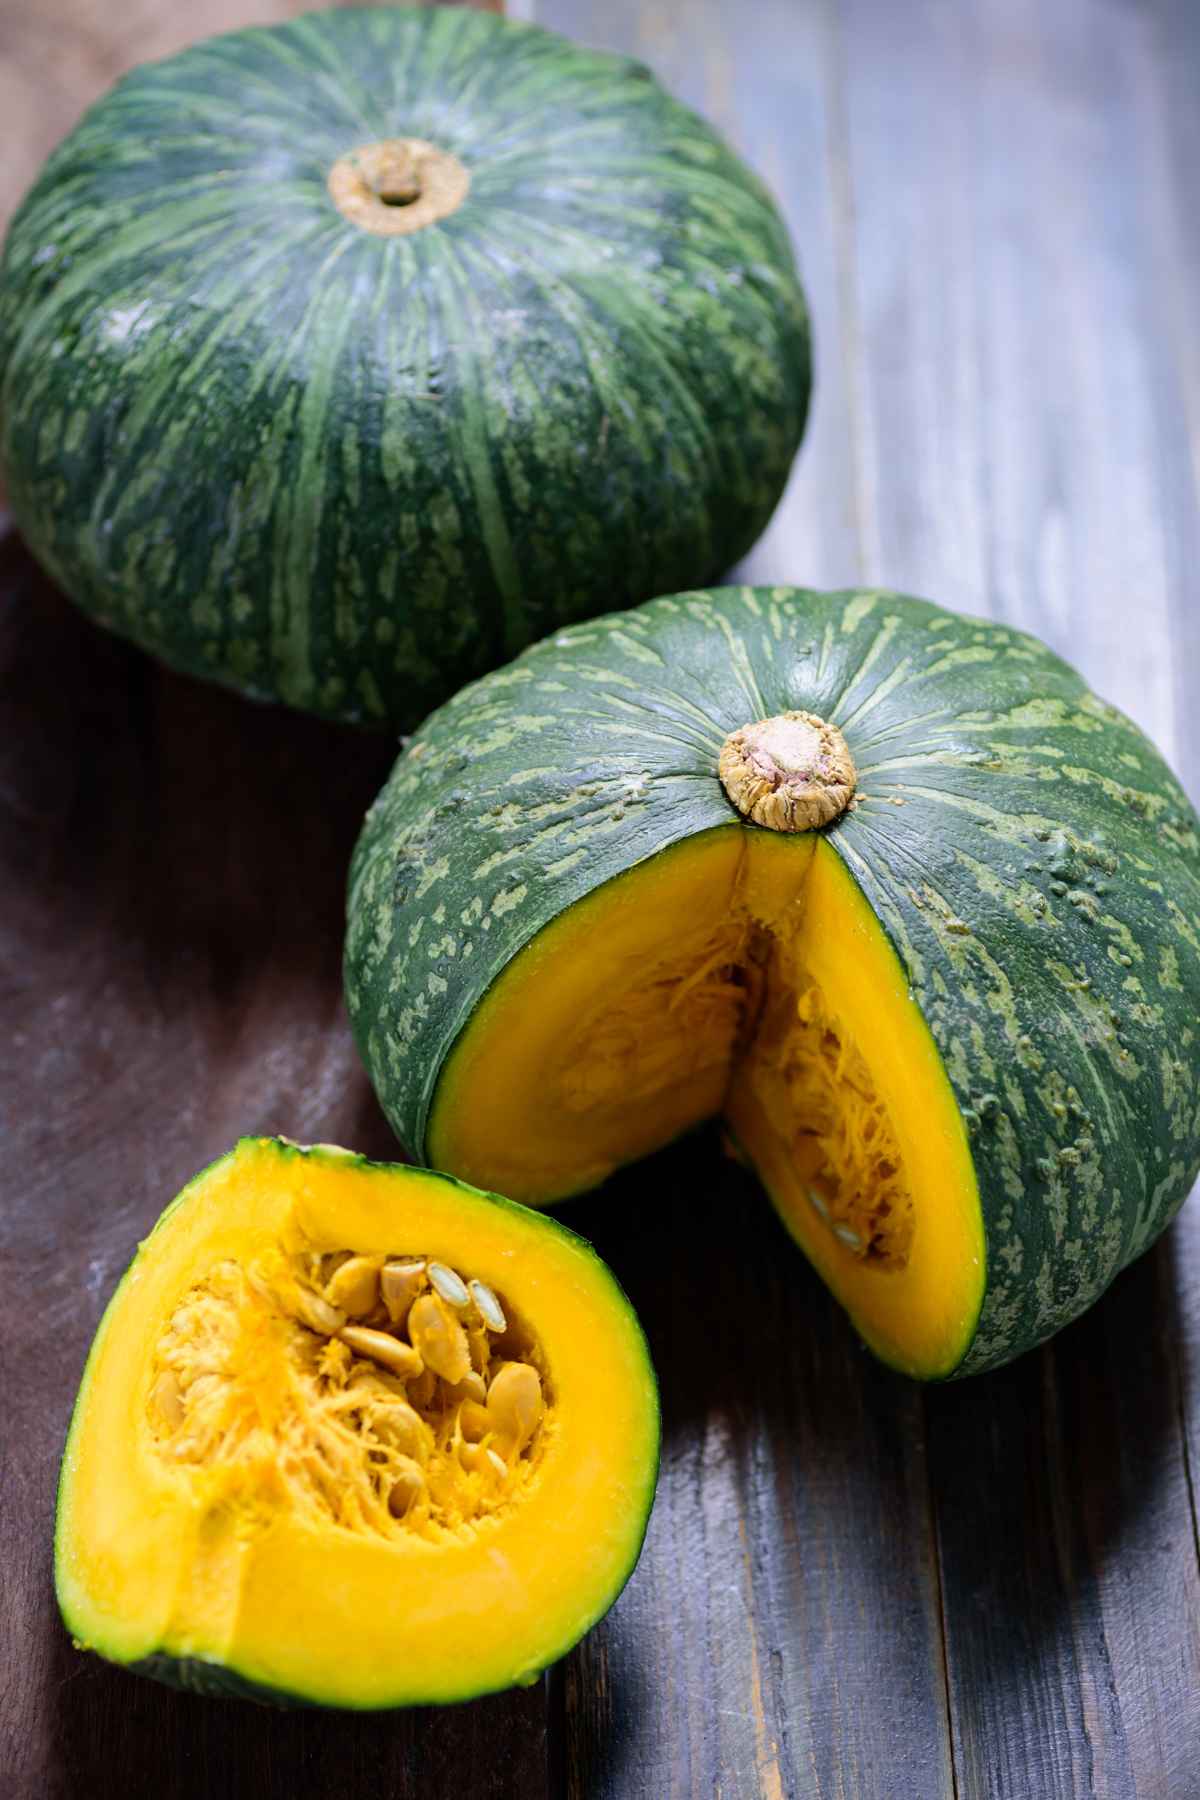 When you think of a pumpkin, your brain probably conjures up images of the bright orange fruits that are carved into jack-o-lanterns every October. You may be surprised to learn that there are several varieties of Green Pumpkins that can be used to make unique and delicious dishes.